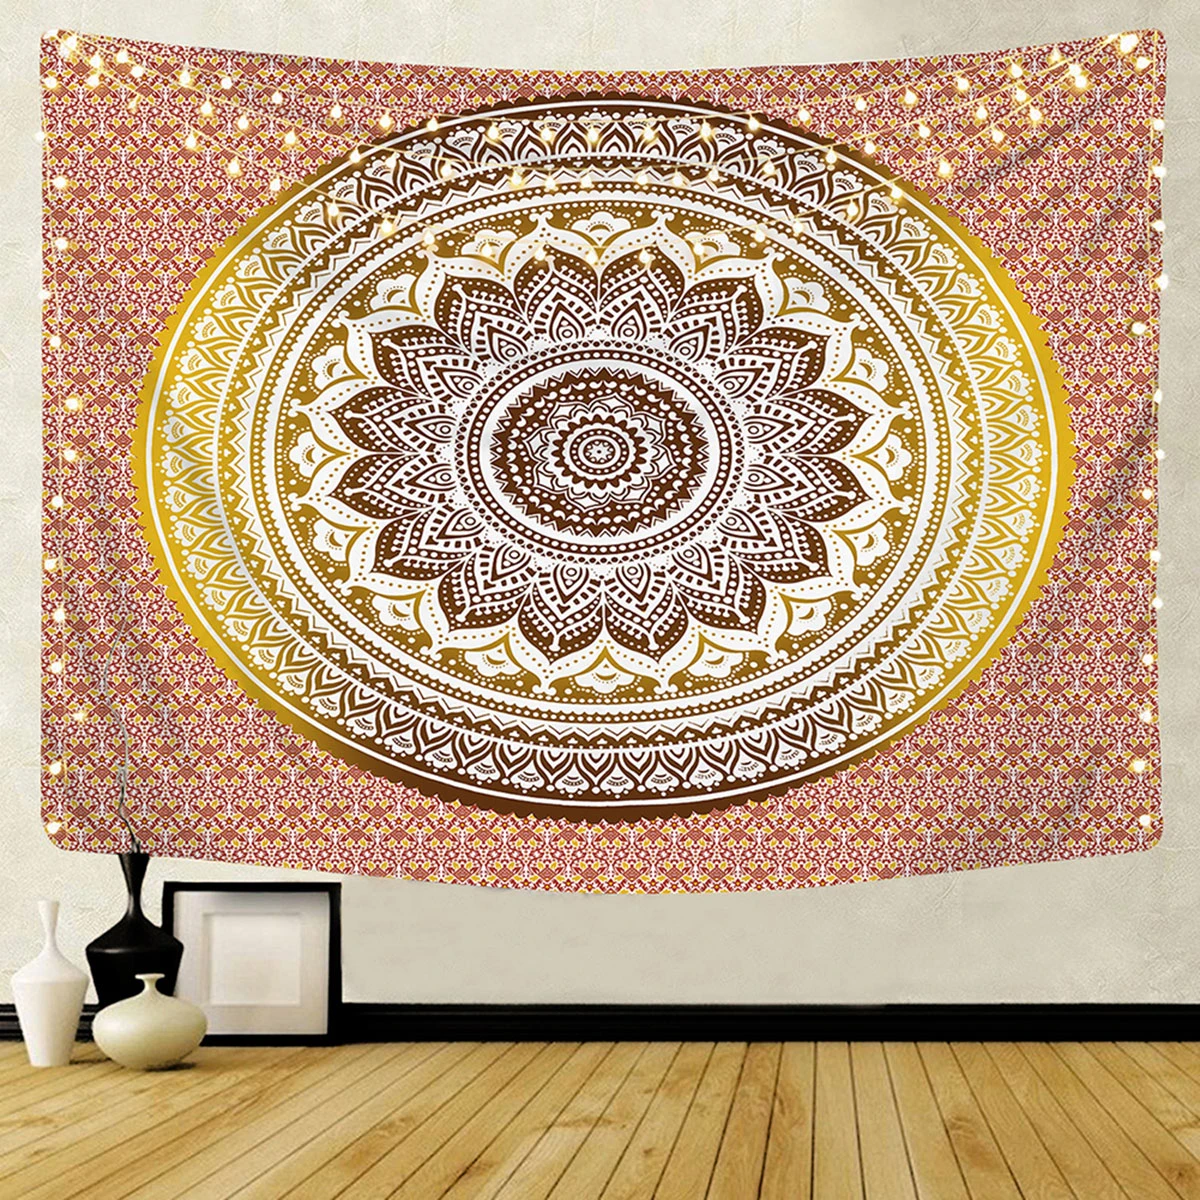 High Quality Wall Hanging Mandala Tapestry Home Decor Wall Tapestries Psychedelic Hippie Night Moon Tapestry Wall Hanging Carpet